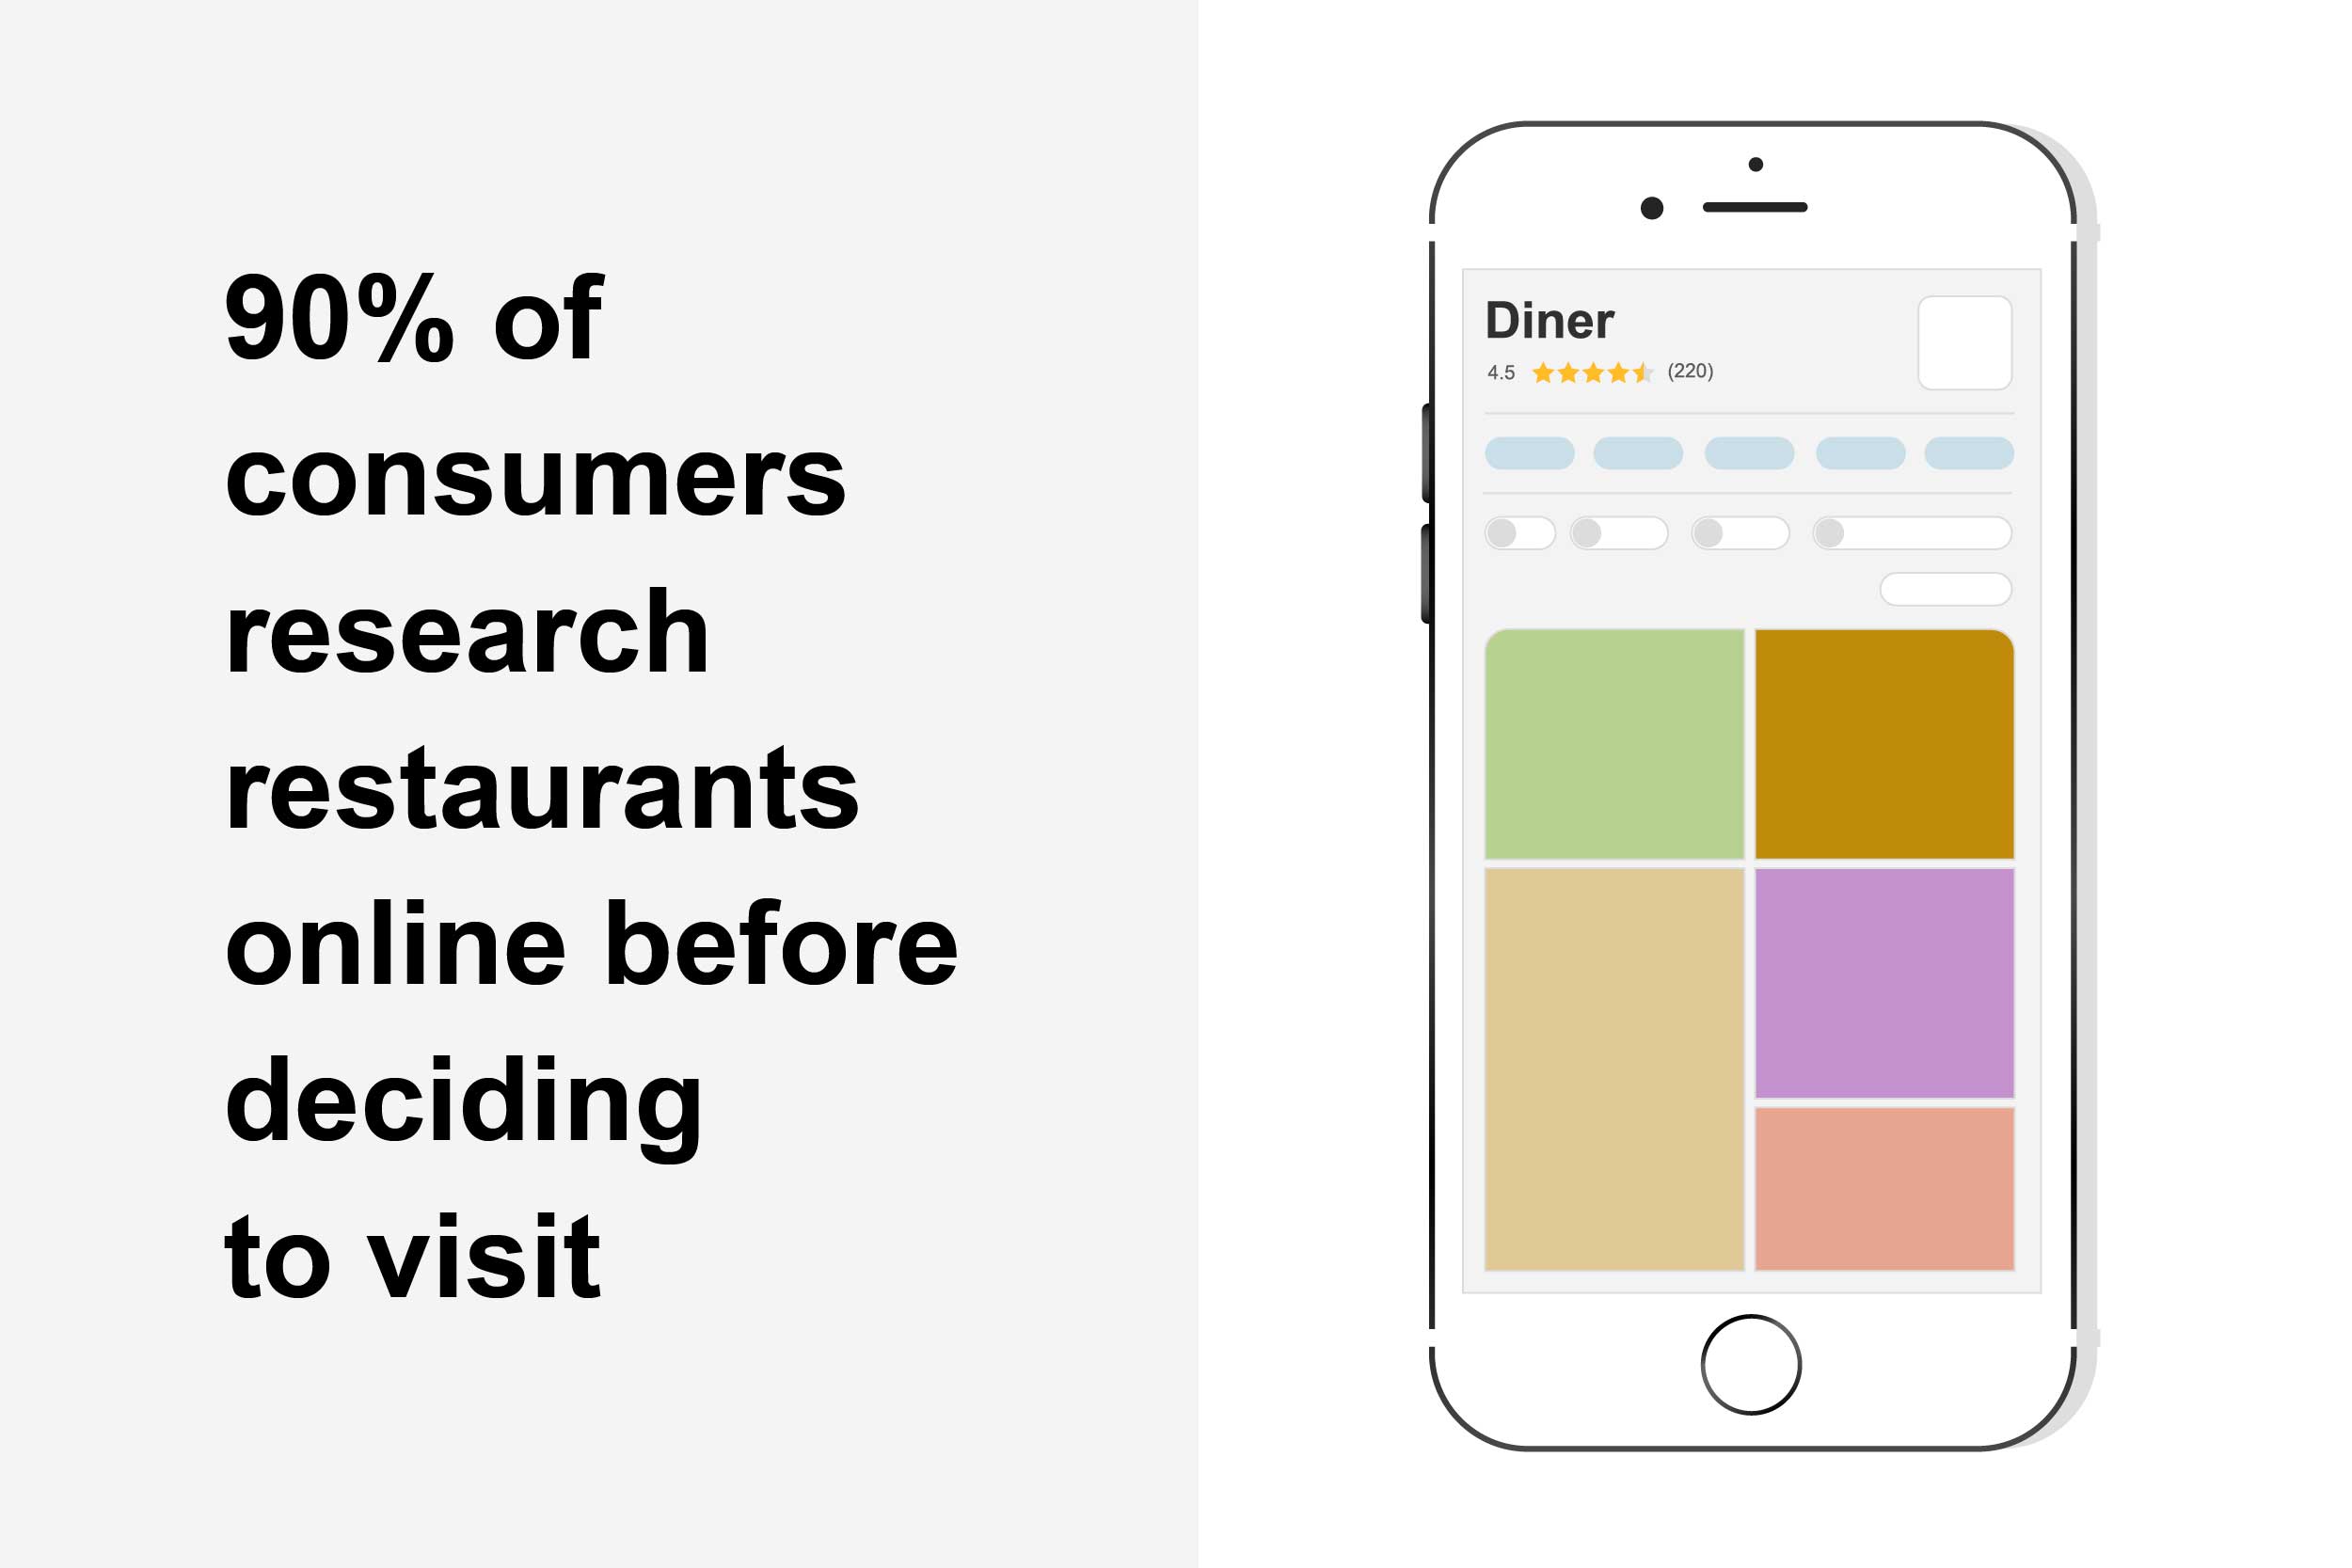 Ninety percent of consumers research restaurants online before deciding to visit.